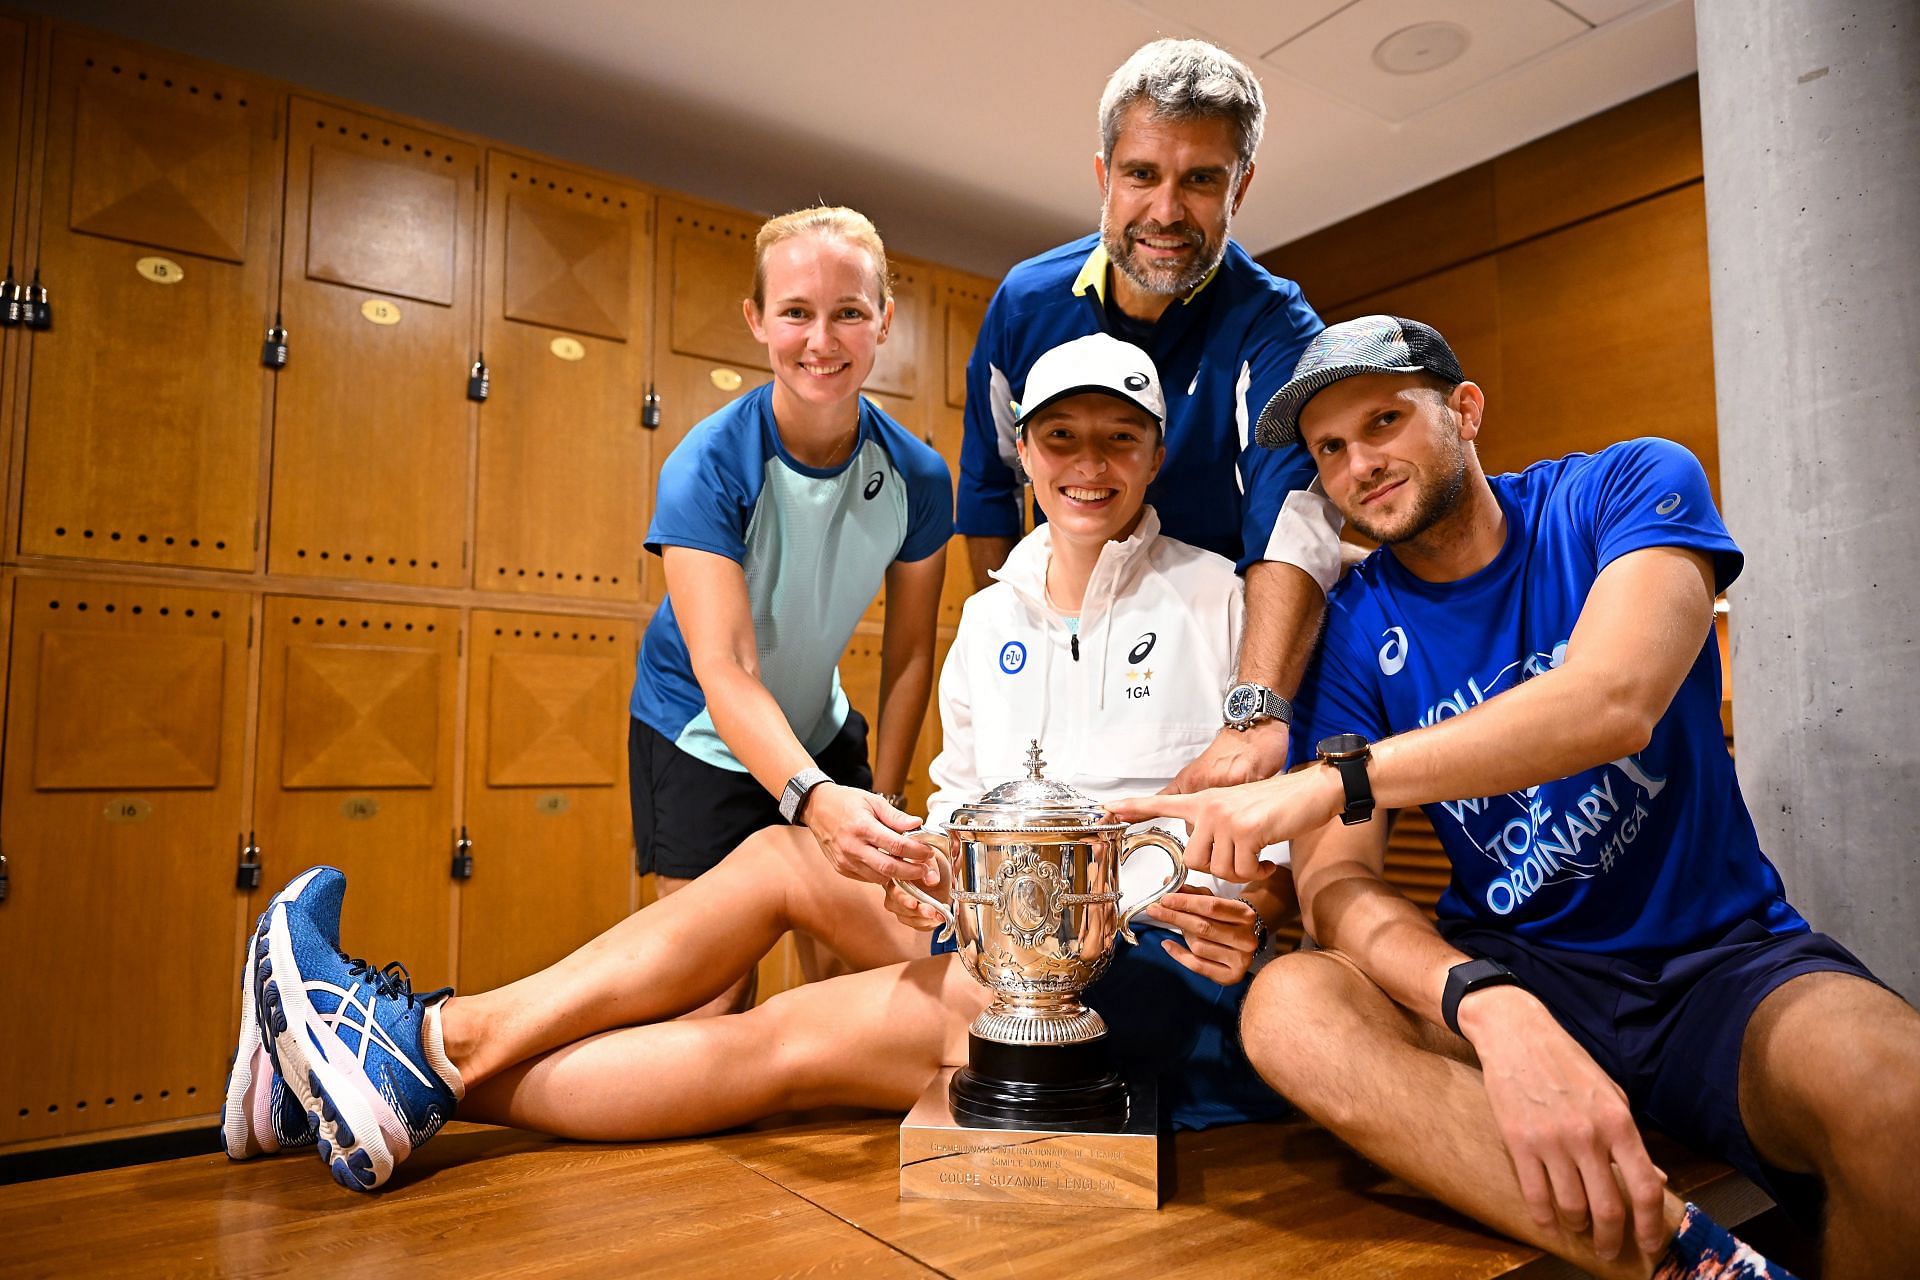 Iga Swiatek, psychologist Daria Abramowicz, and the team at the 2022 French Open (Source: GETTY)